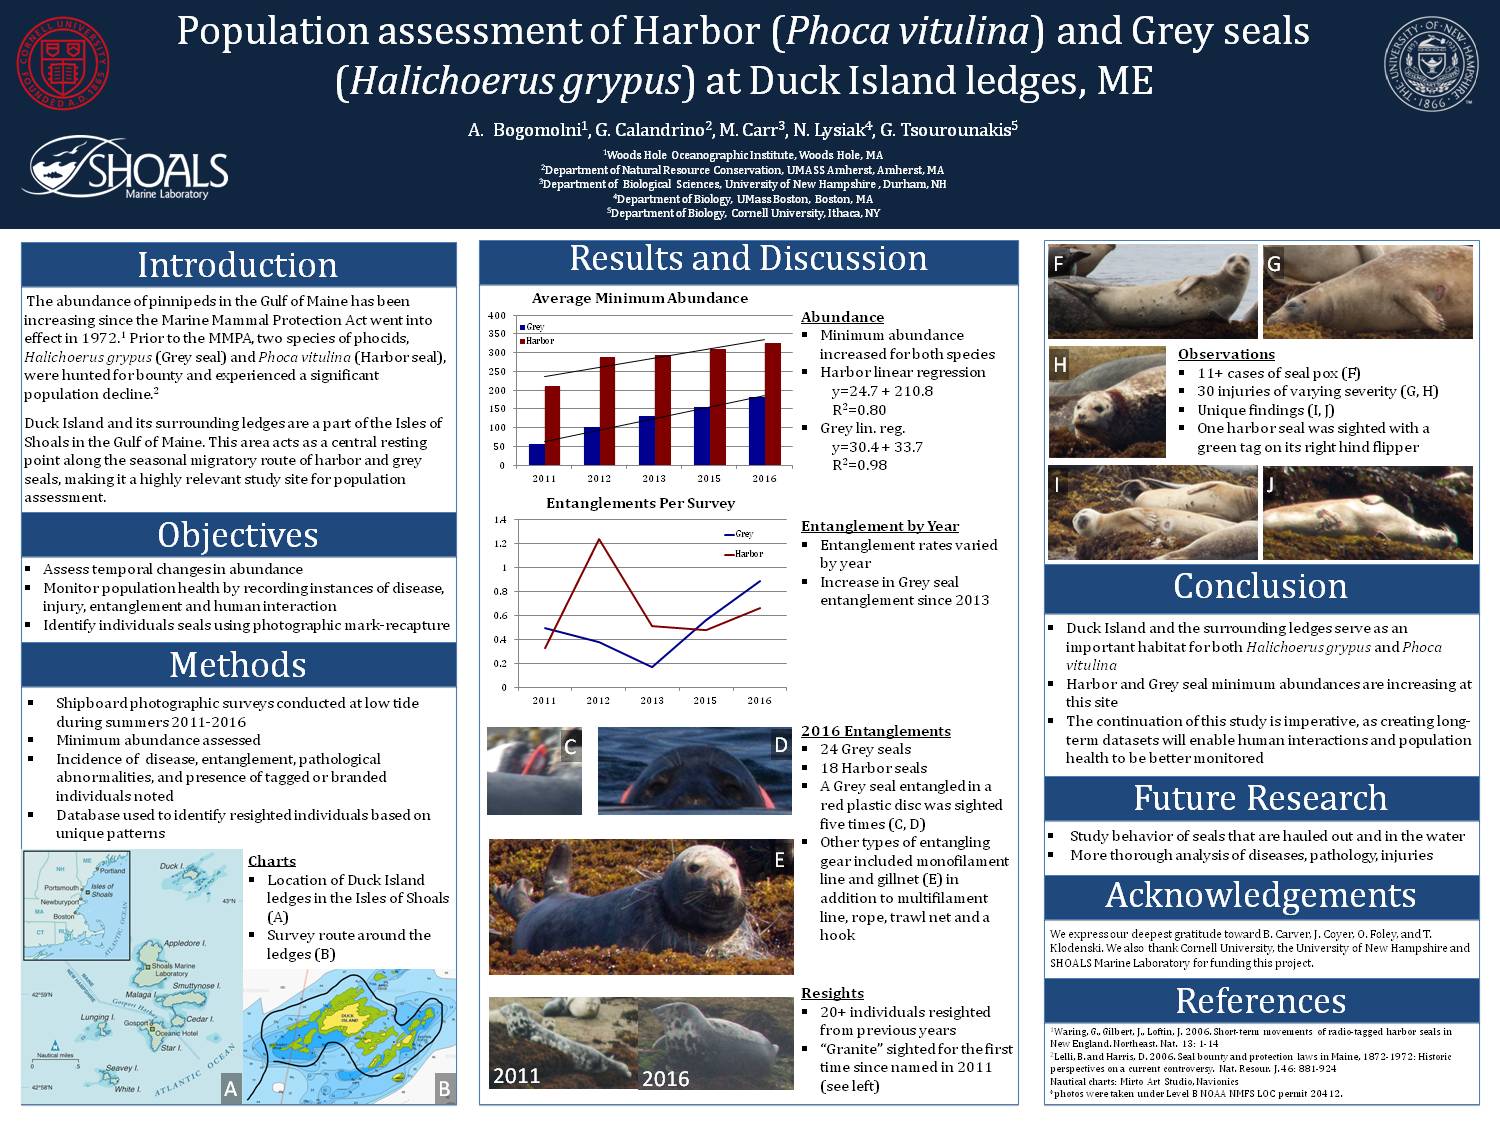 Population Assessment Of Harbor (Phoca Vitulina) And Grey Seals (Halichoerus Grypus) At Duck Island Ledges, Me by jacoyer